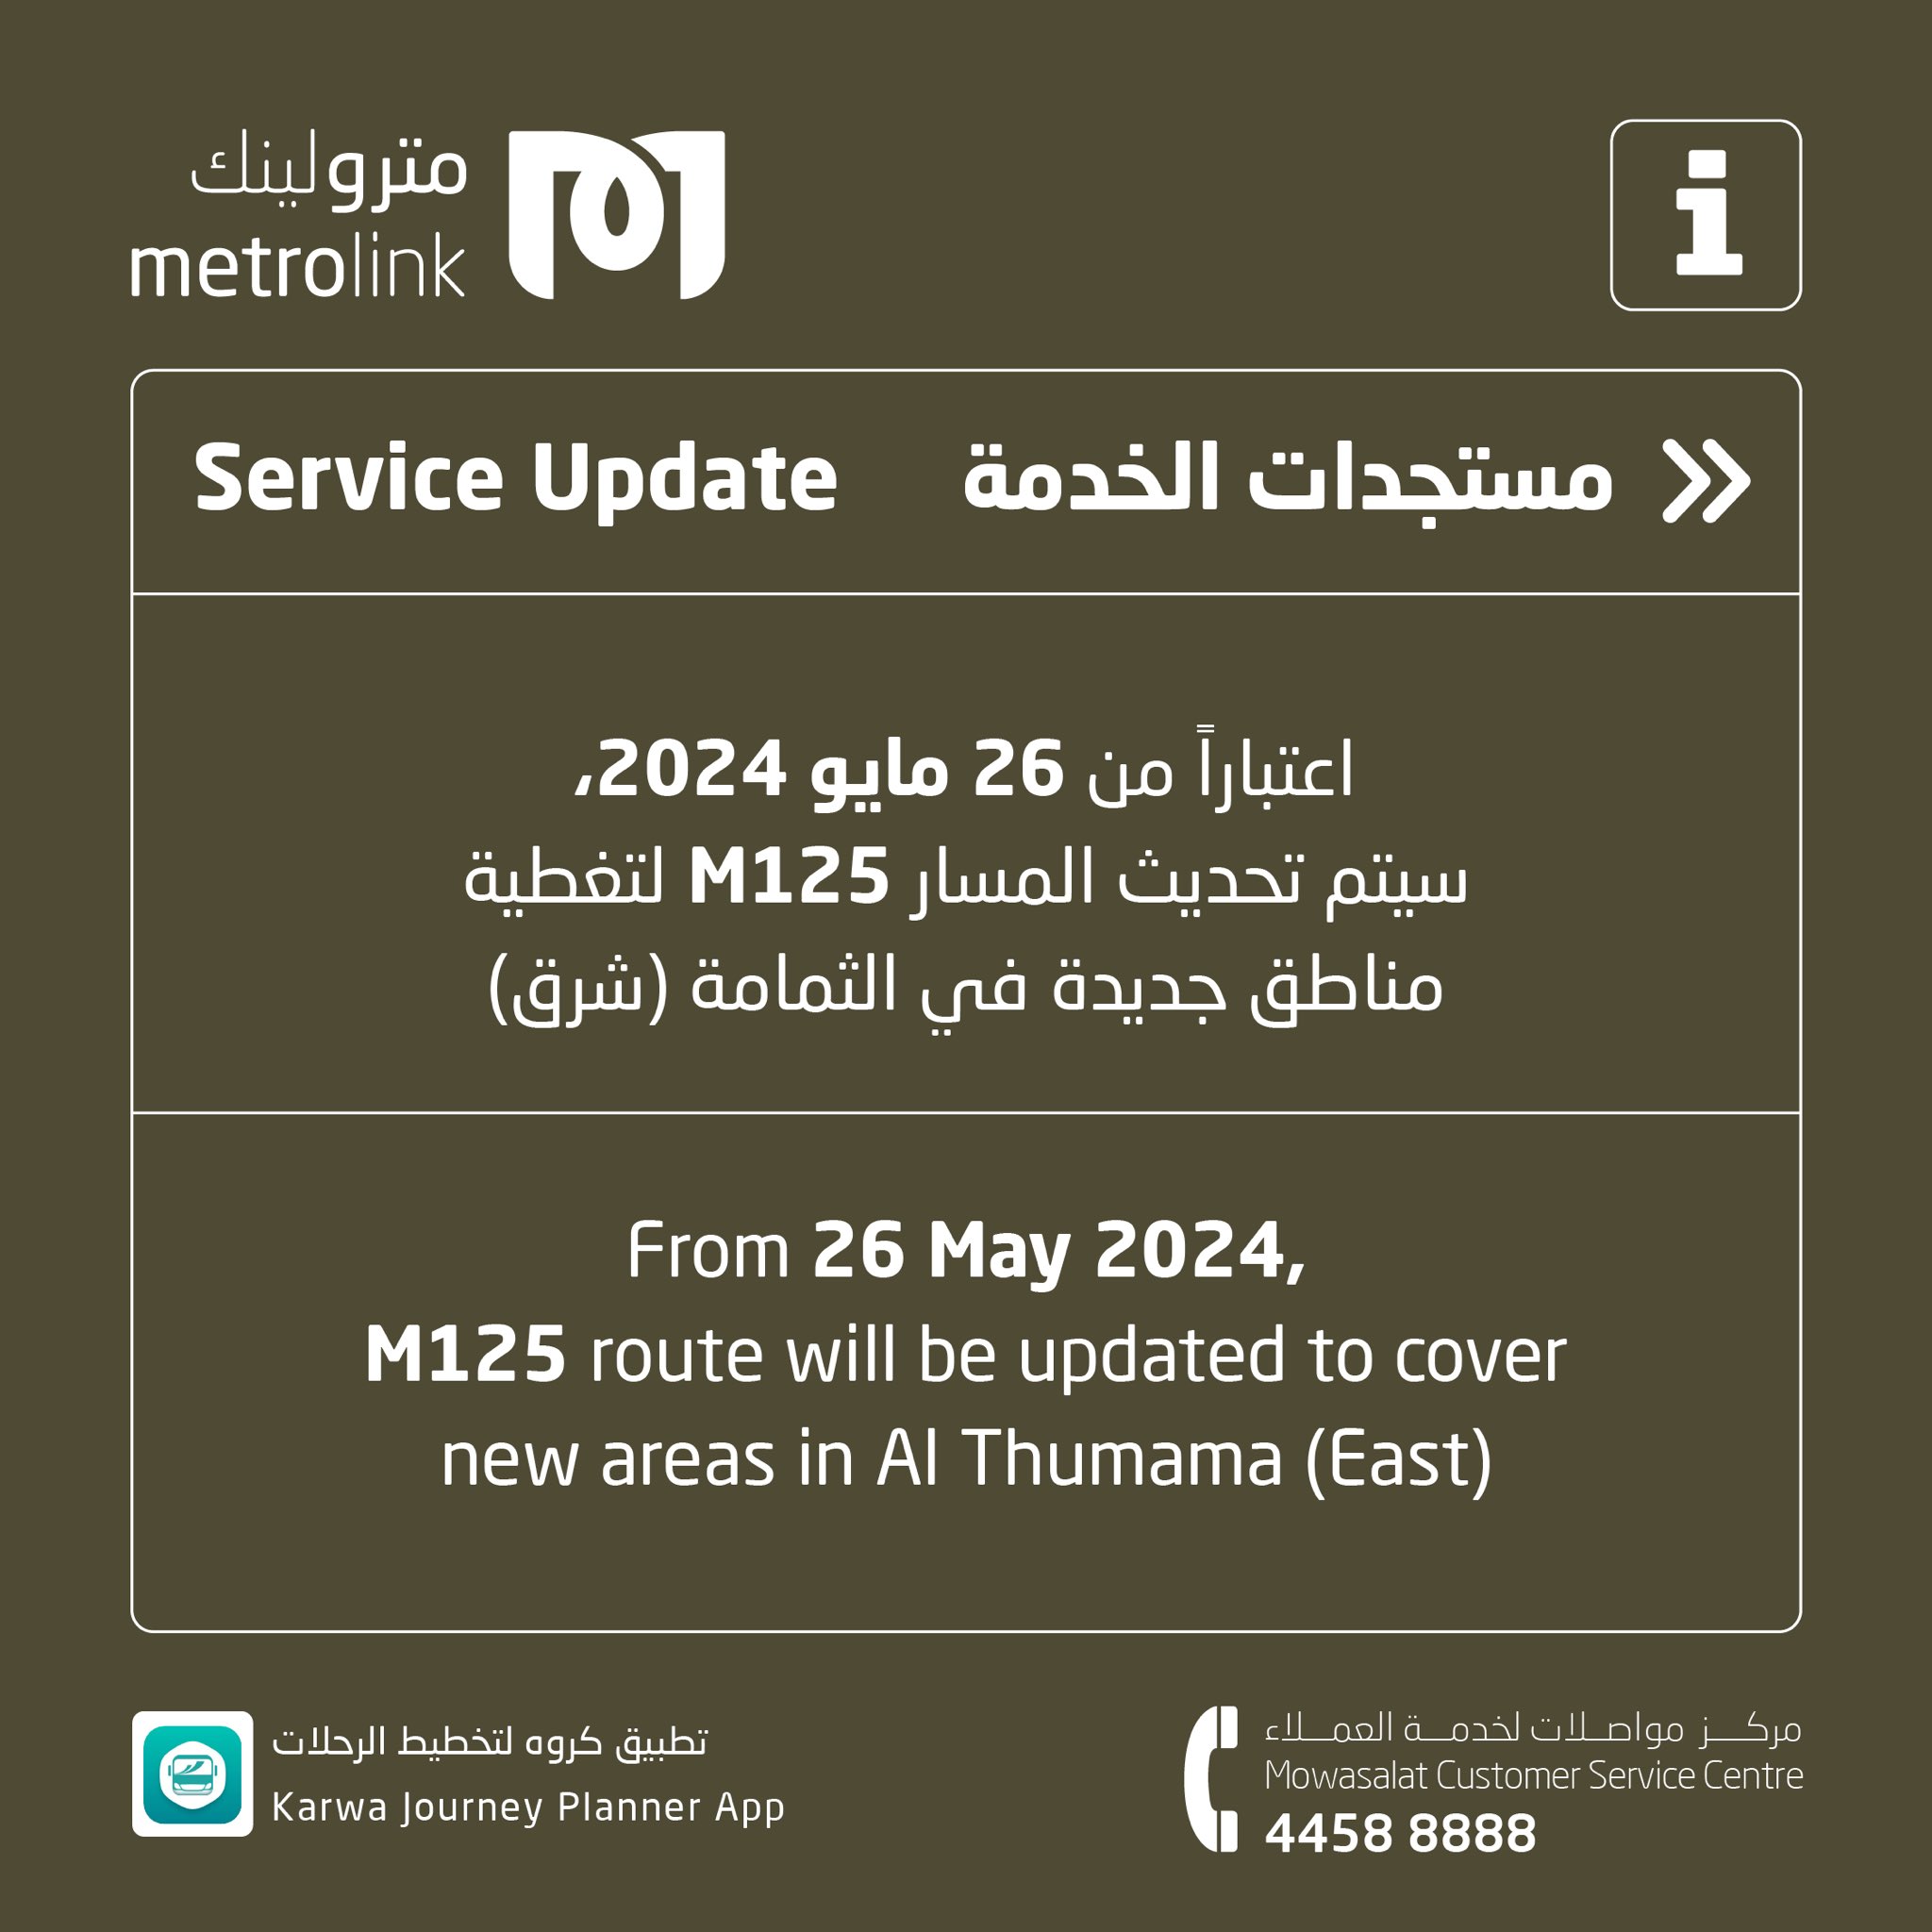 Doha Metro: New Routes Serving Al Thumama and The Pearl Island